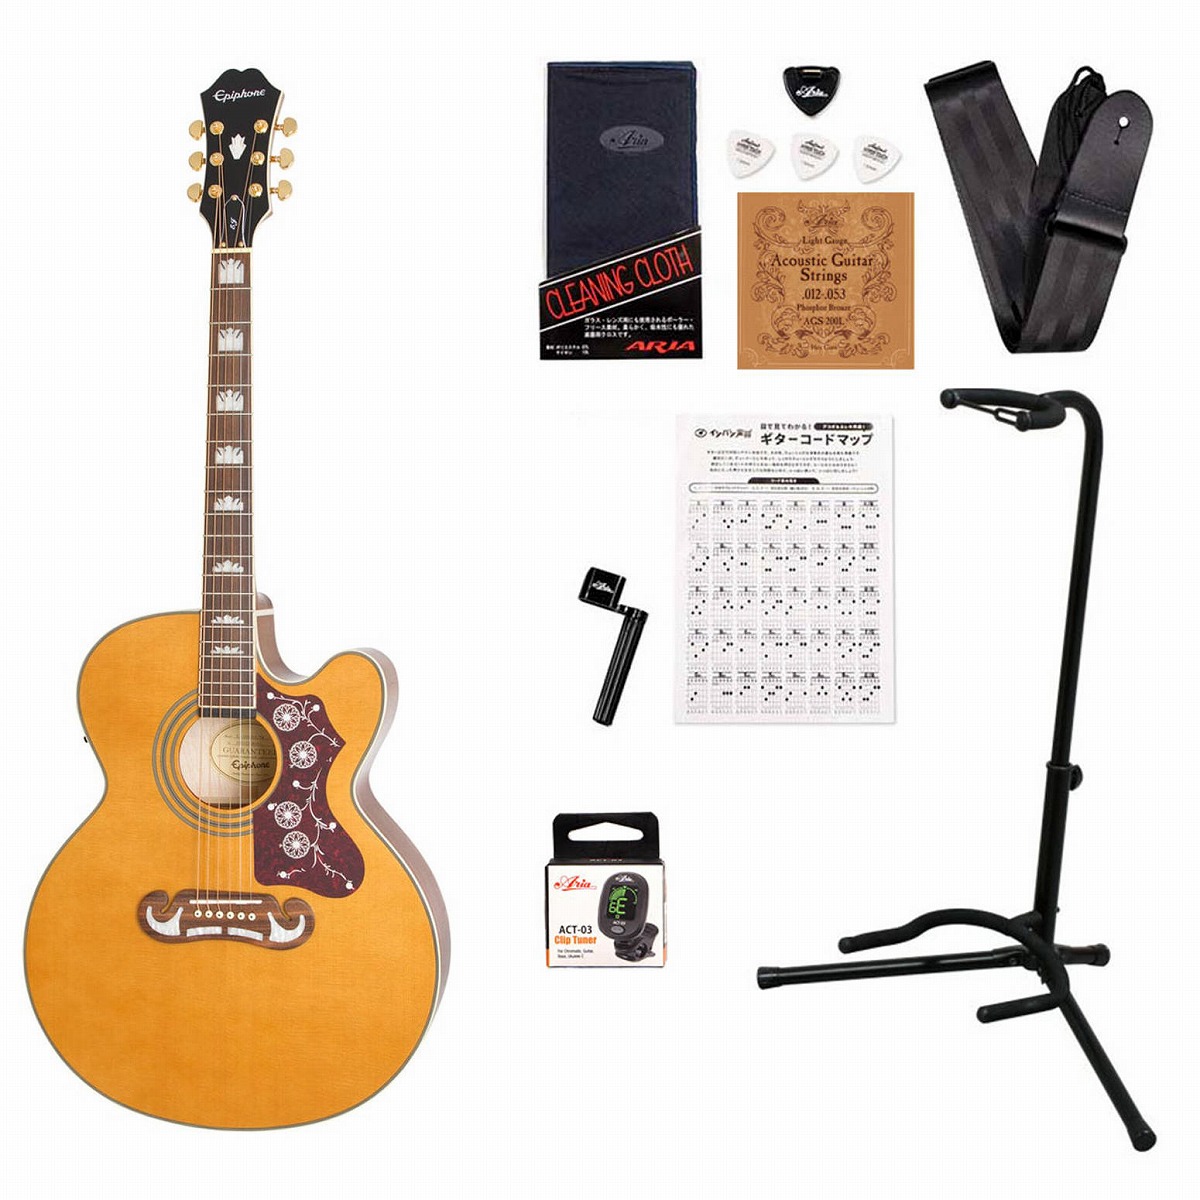 EPIPHONE BY GIBSON / J-200EC STUDIO VN (EJ-200SCE)アコギ入門豪華12点初心者セット